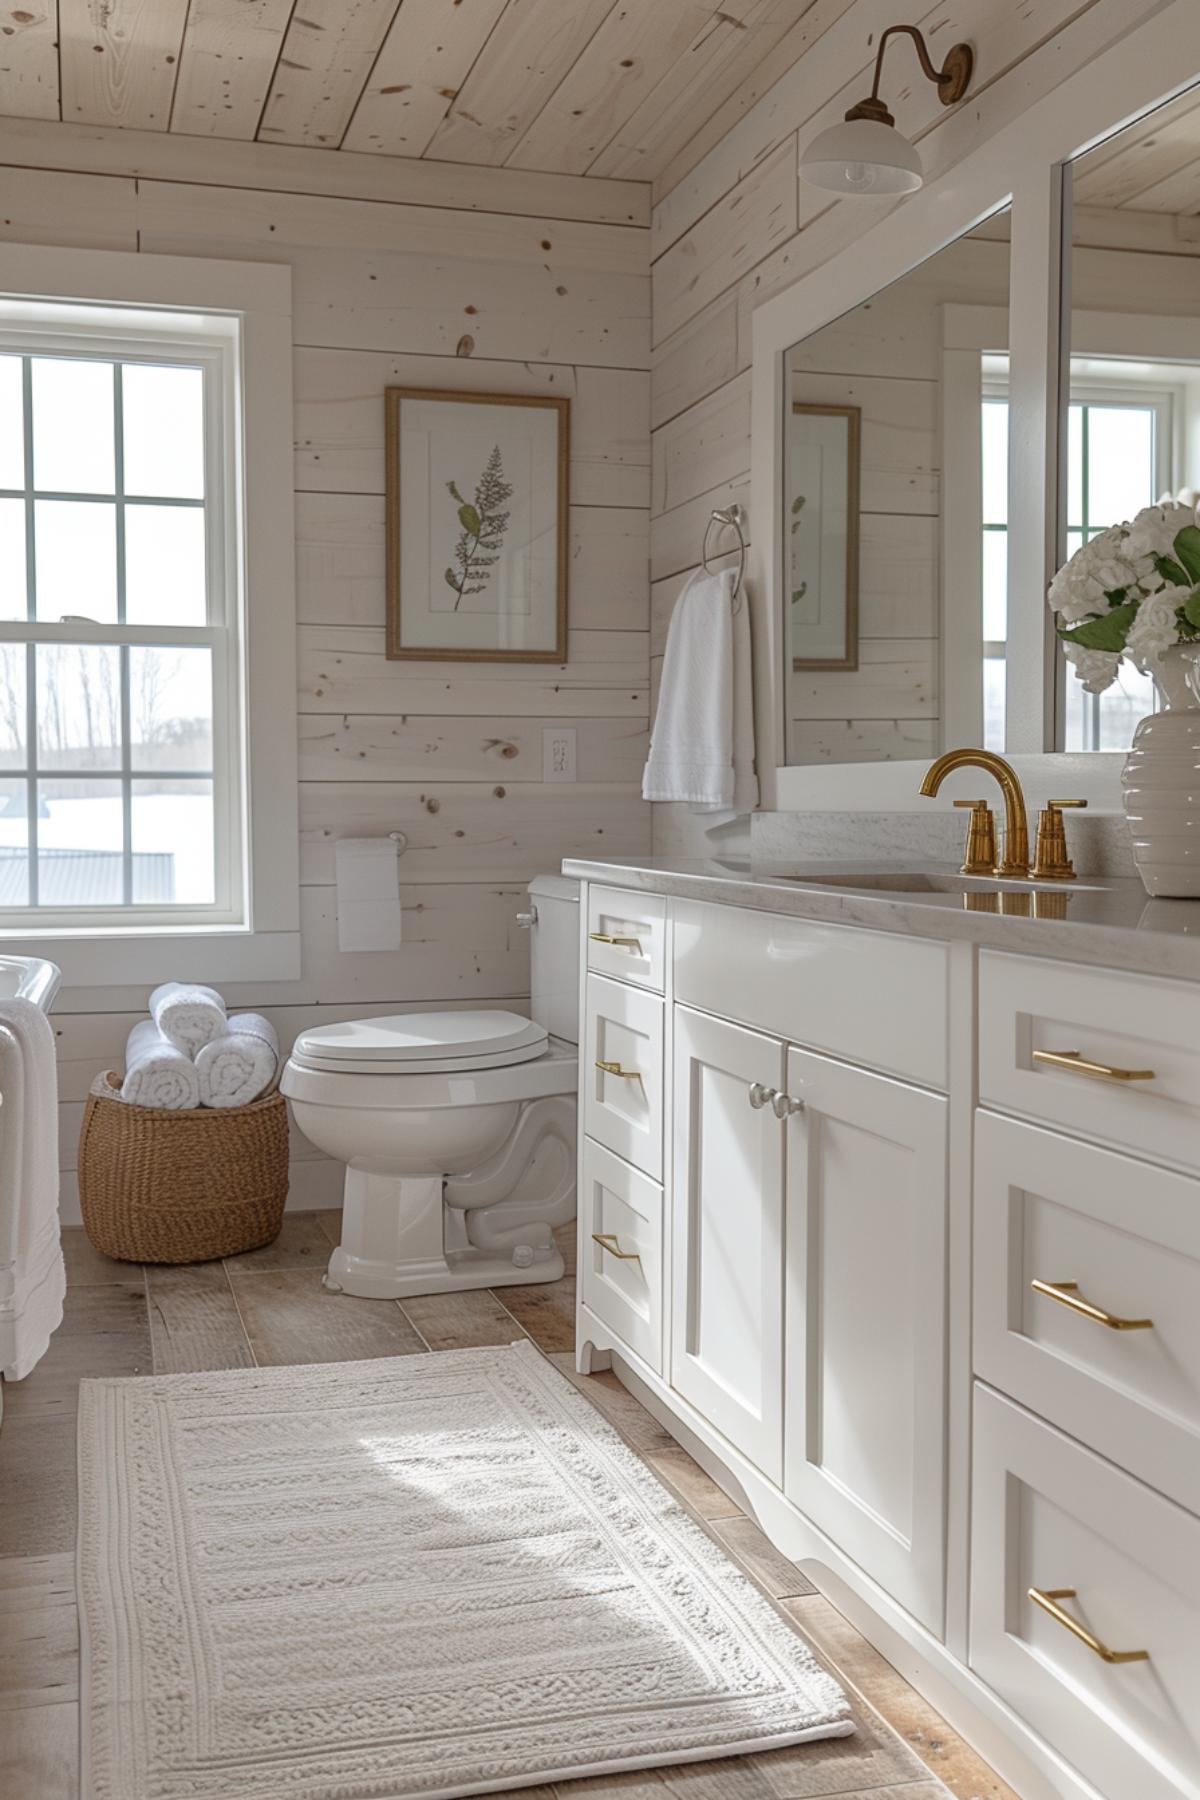 Ready to give your bathroom a stylish update with shiplap bathroom ideas? Dive into my easy-to-follow tips for choosing materials, layouts, and colors that'll turn your space into a cozy haven you'll love.